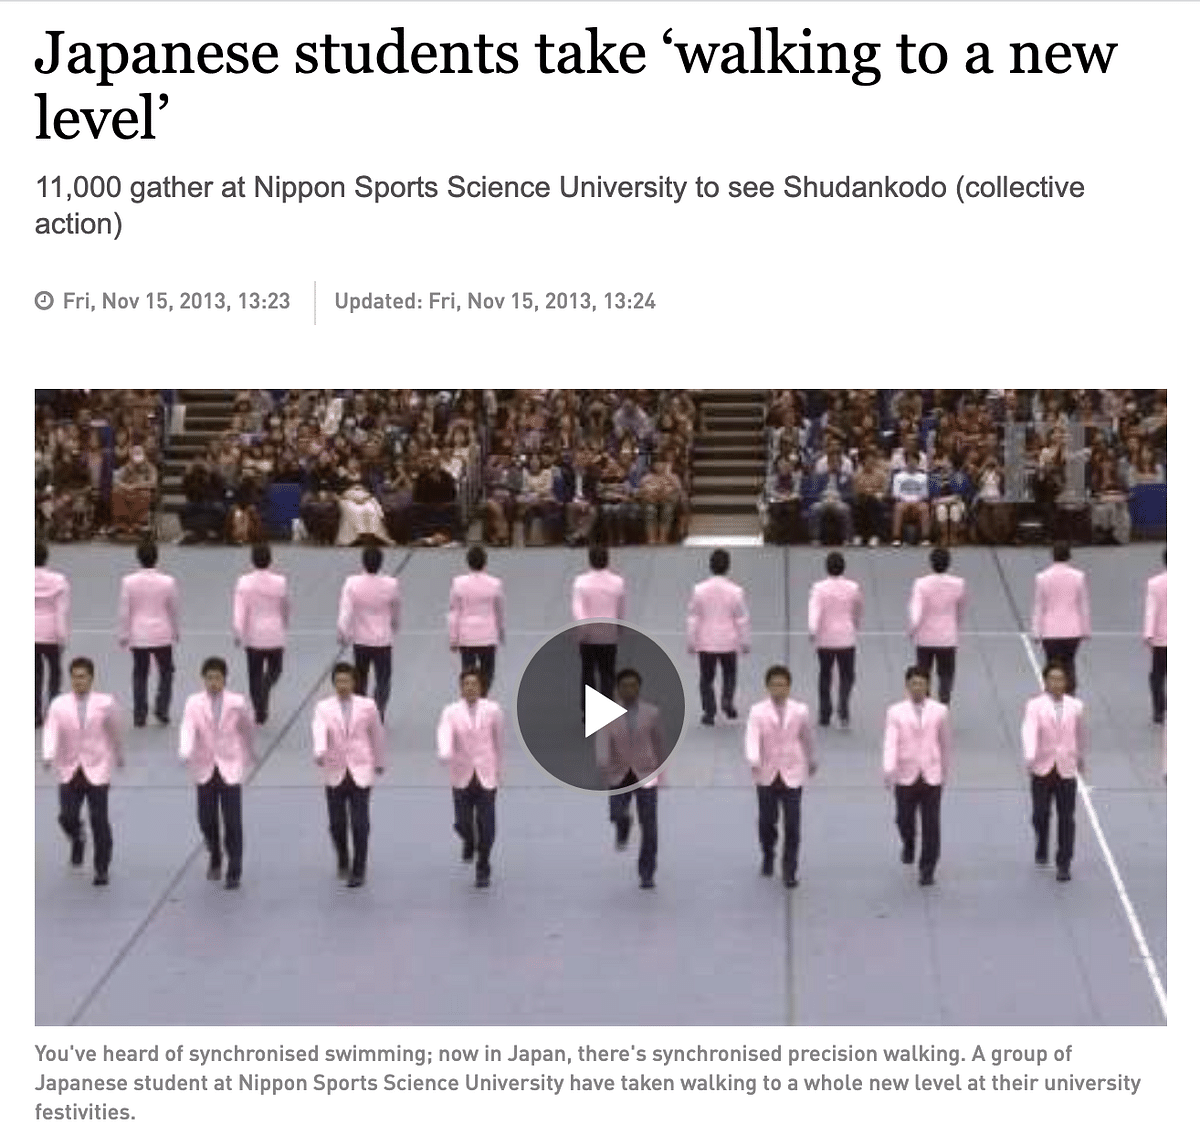 We traced the video back to 2013 which showed a performance by the students from a university in Japan.